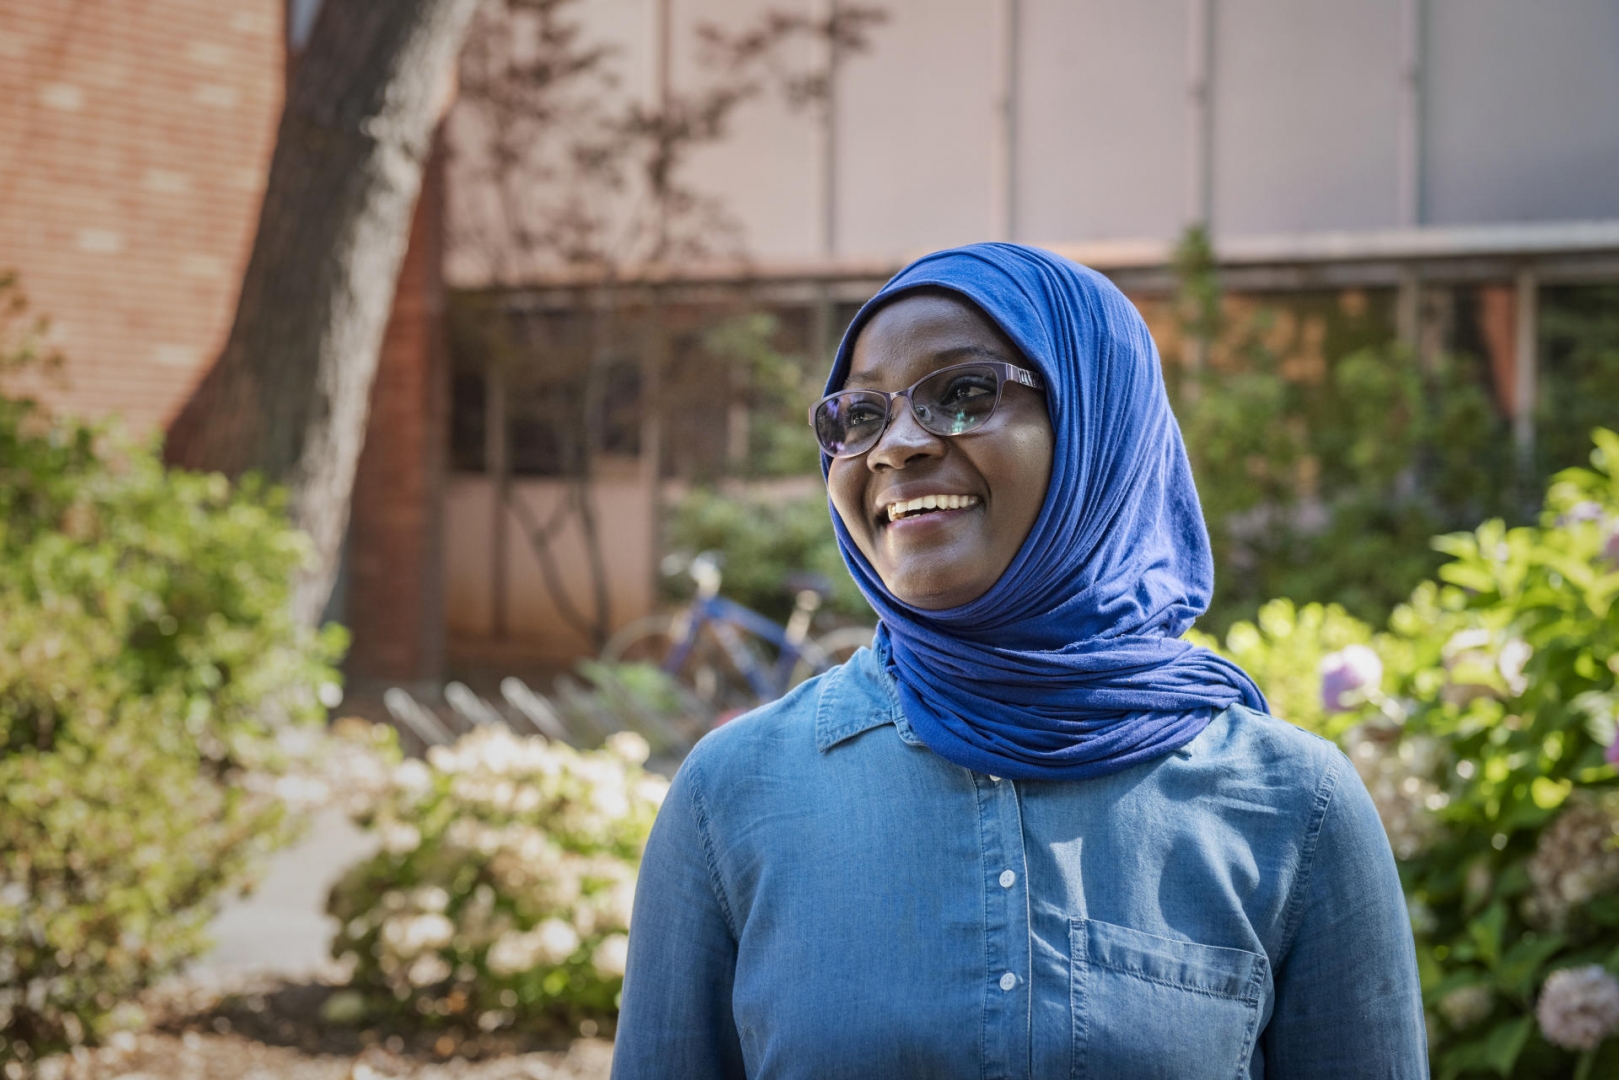 A teacher from Ghana smiles in front of classrooms, wearing a denim top and bright blue scarf on her head.